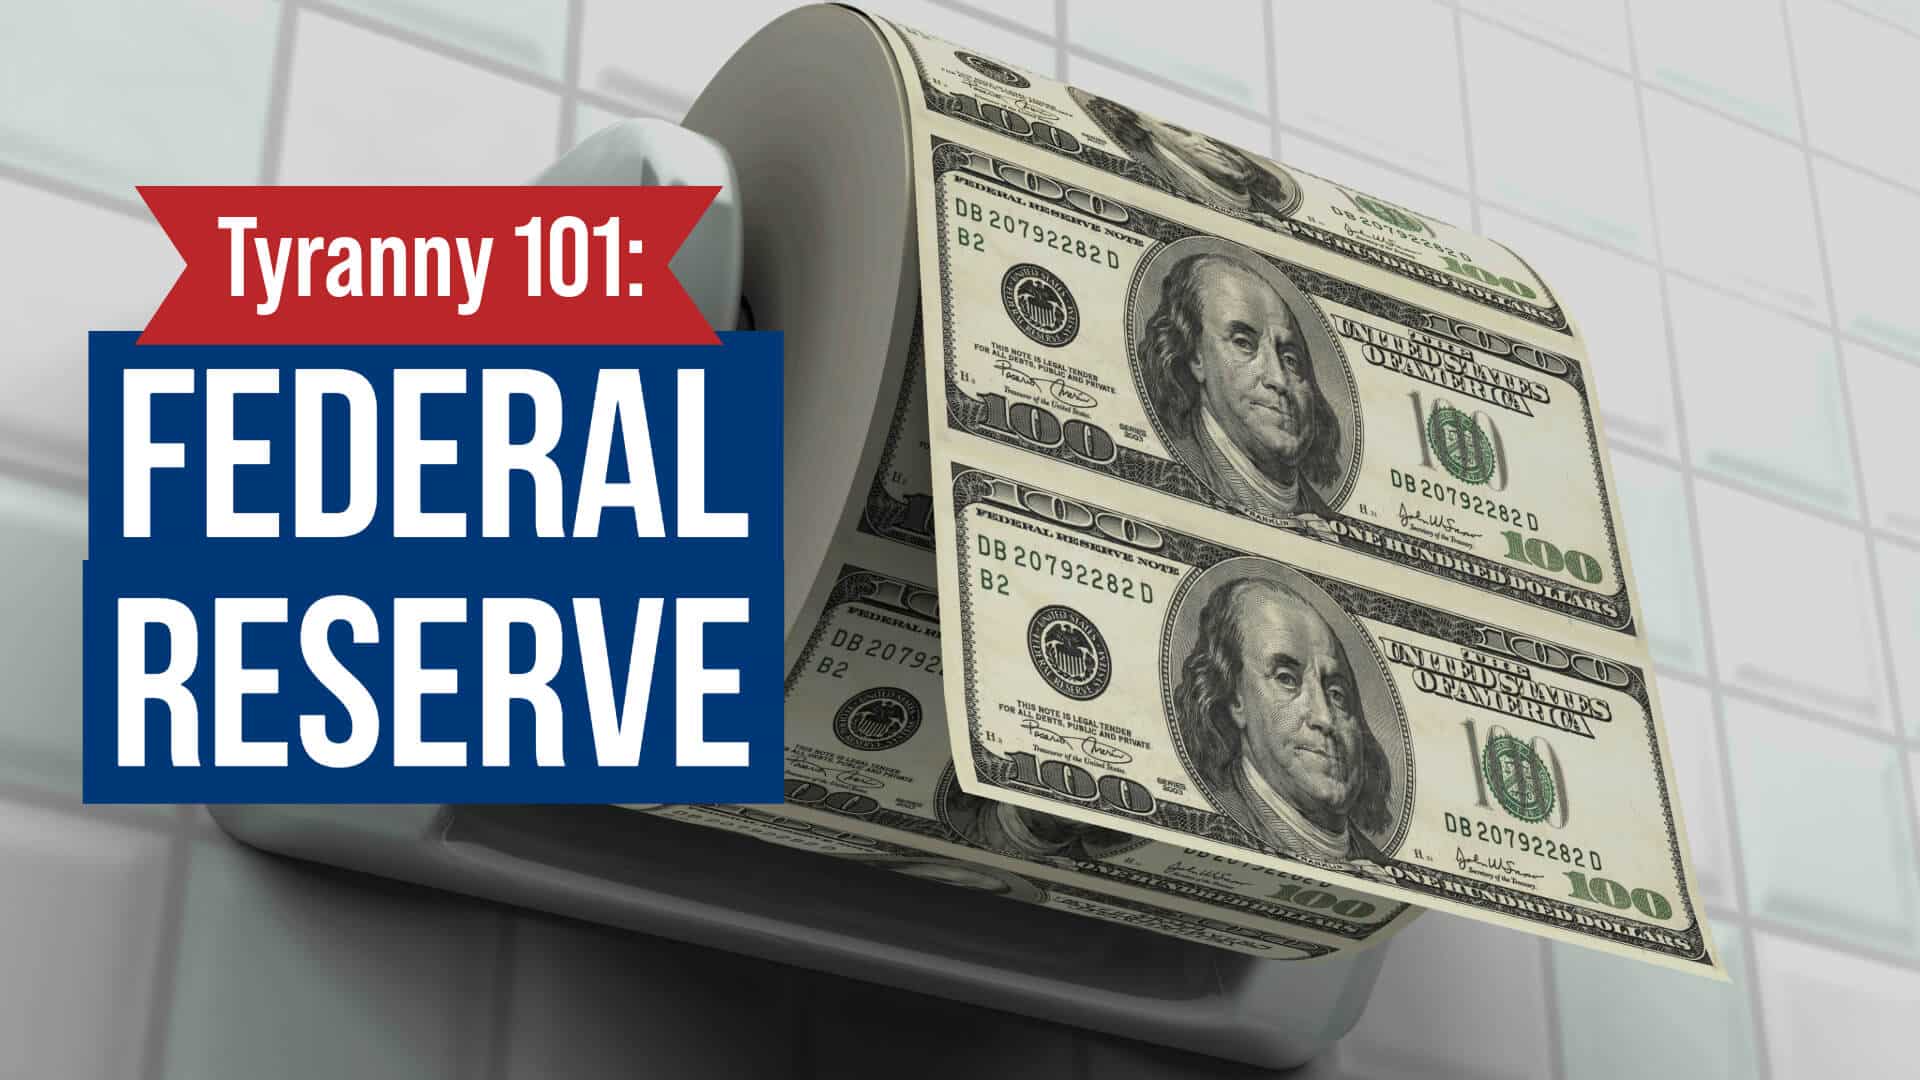 Tyranny 101: How the Federal Reserve Powers the Monster State